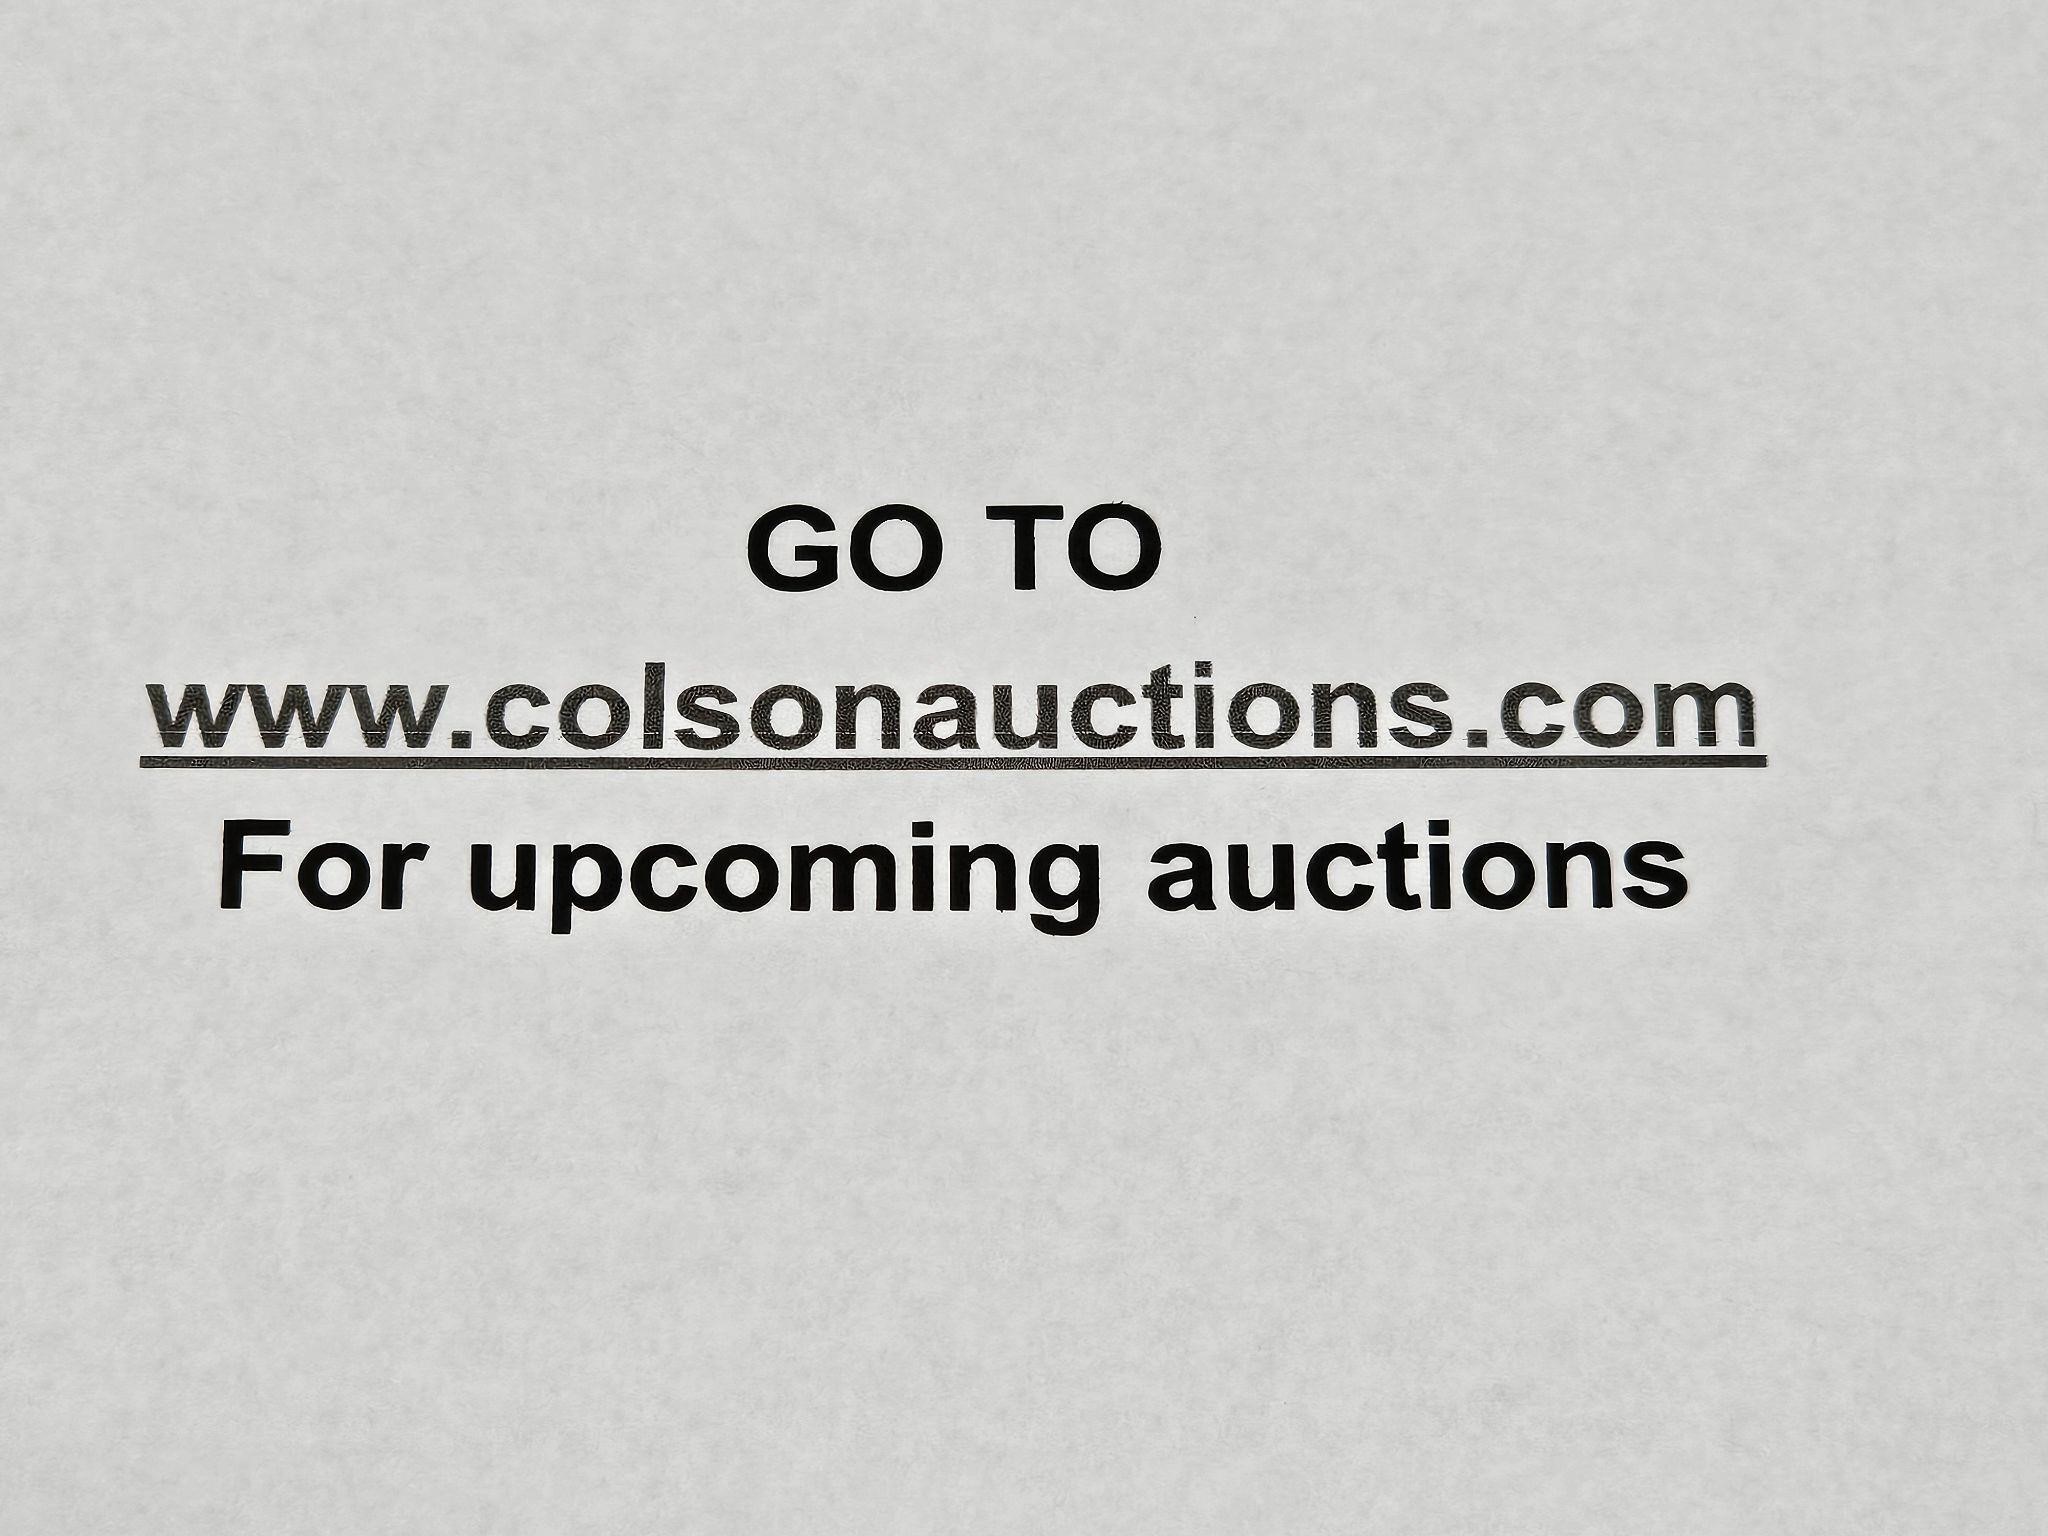 Go to www.colsonauctions.com for upcoming auctions